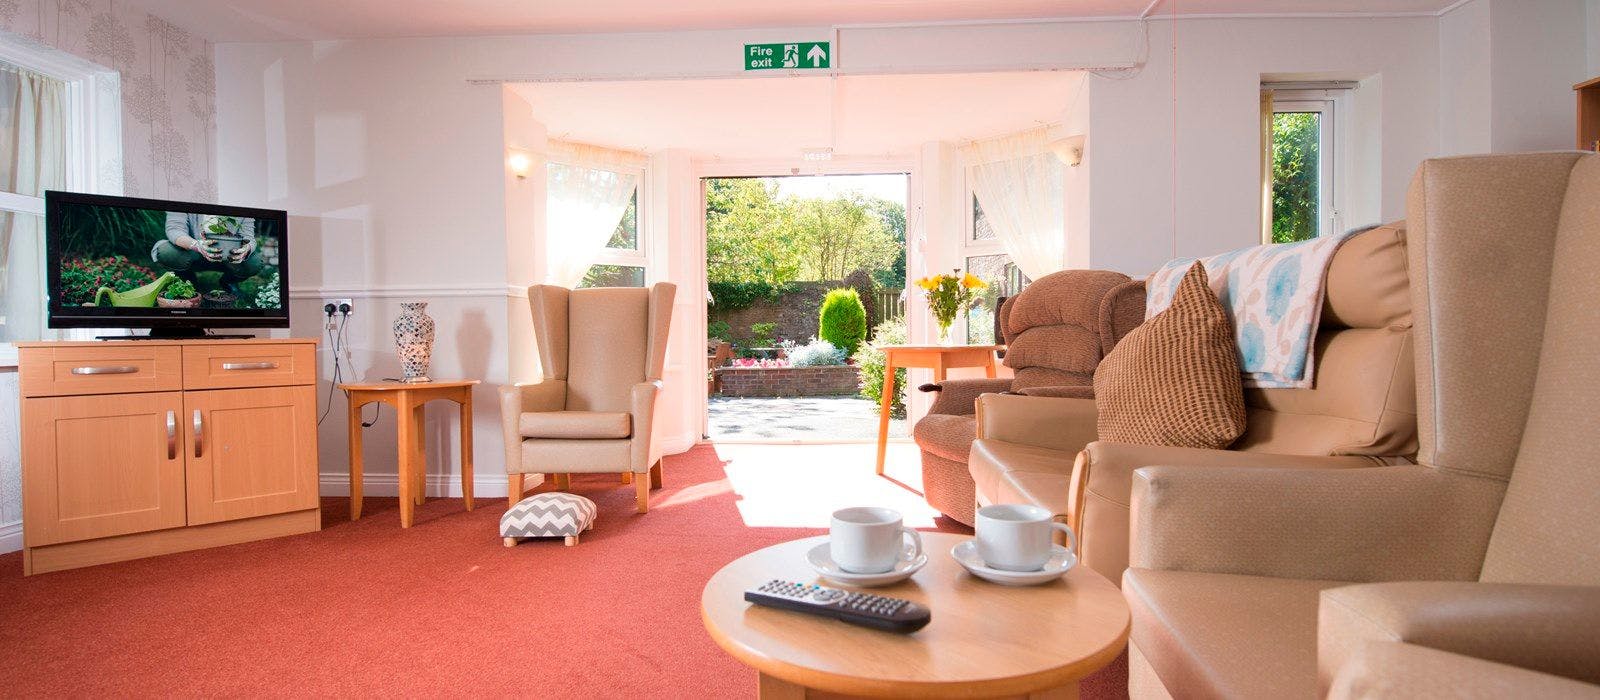 Redwell Hills care home